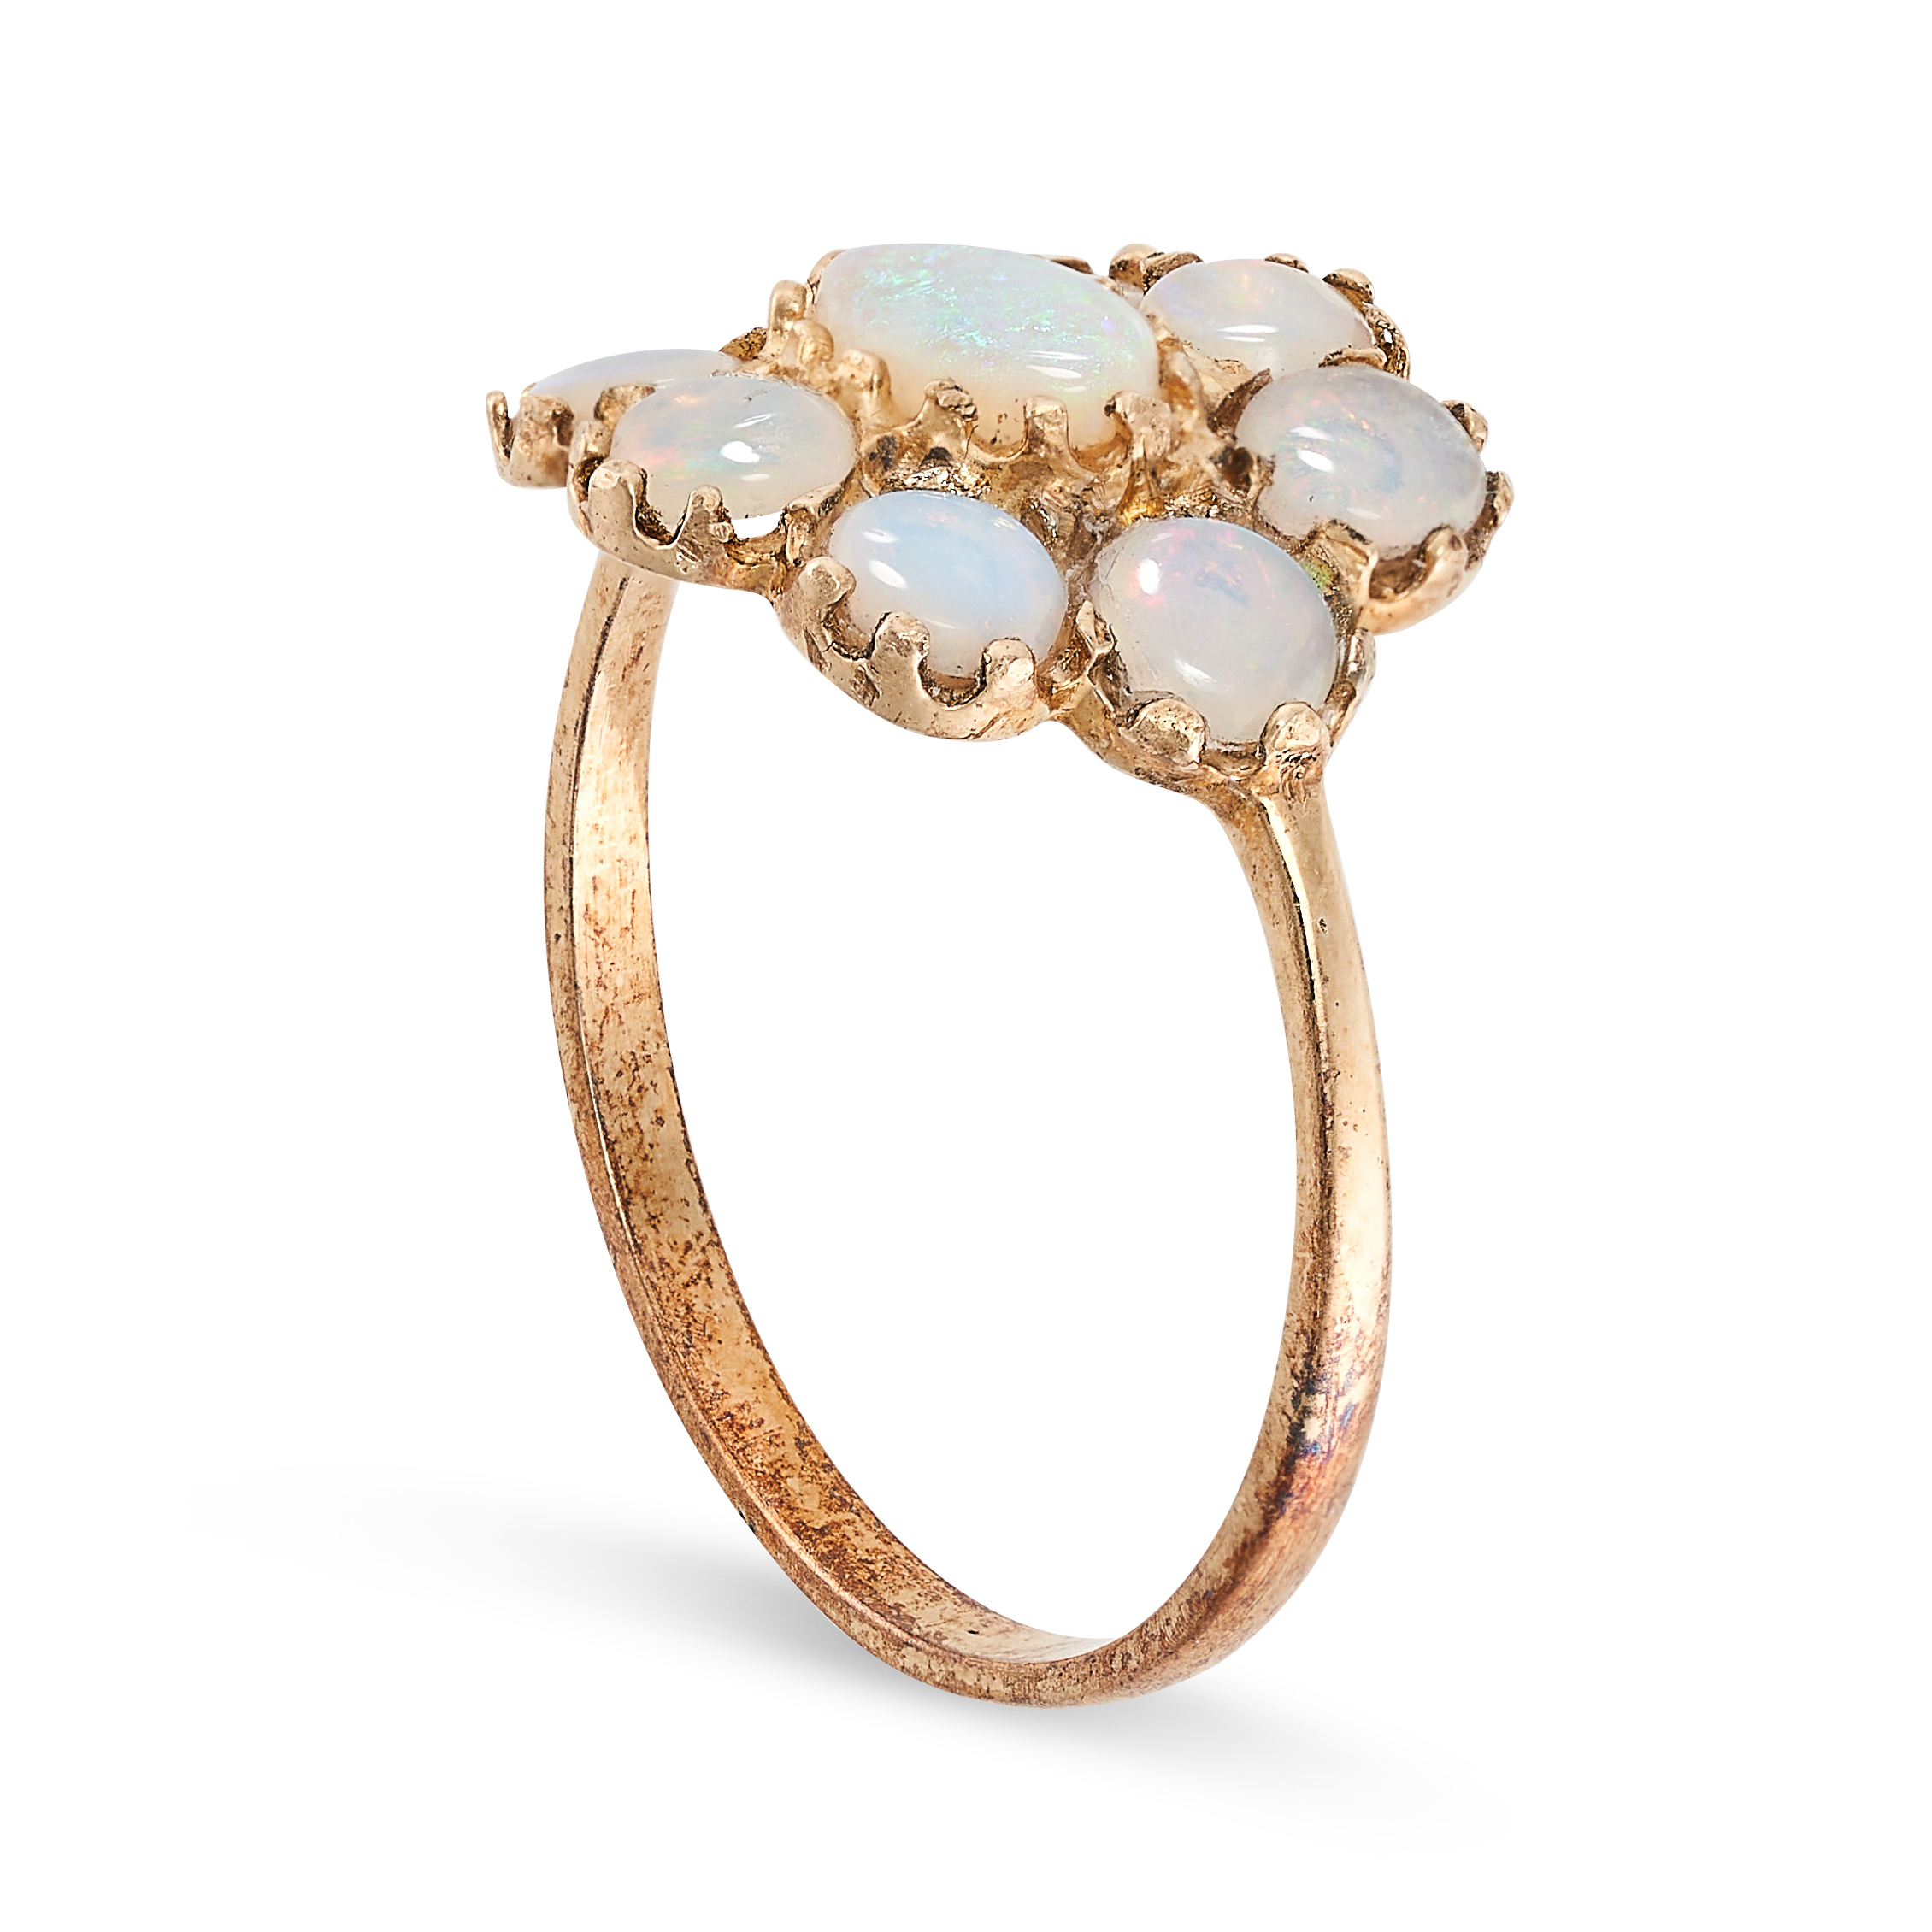 AN OPAL RING in 9ct yellow gold, set with a cluster of cabochon opals, full British hallmarks, - Image 2 of 2